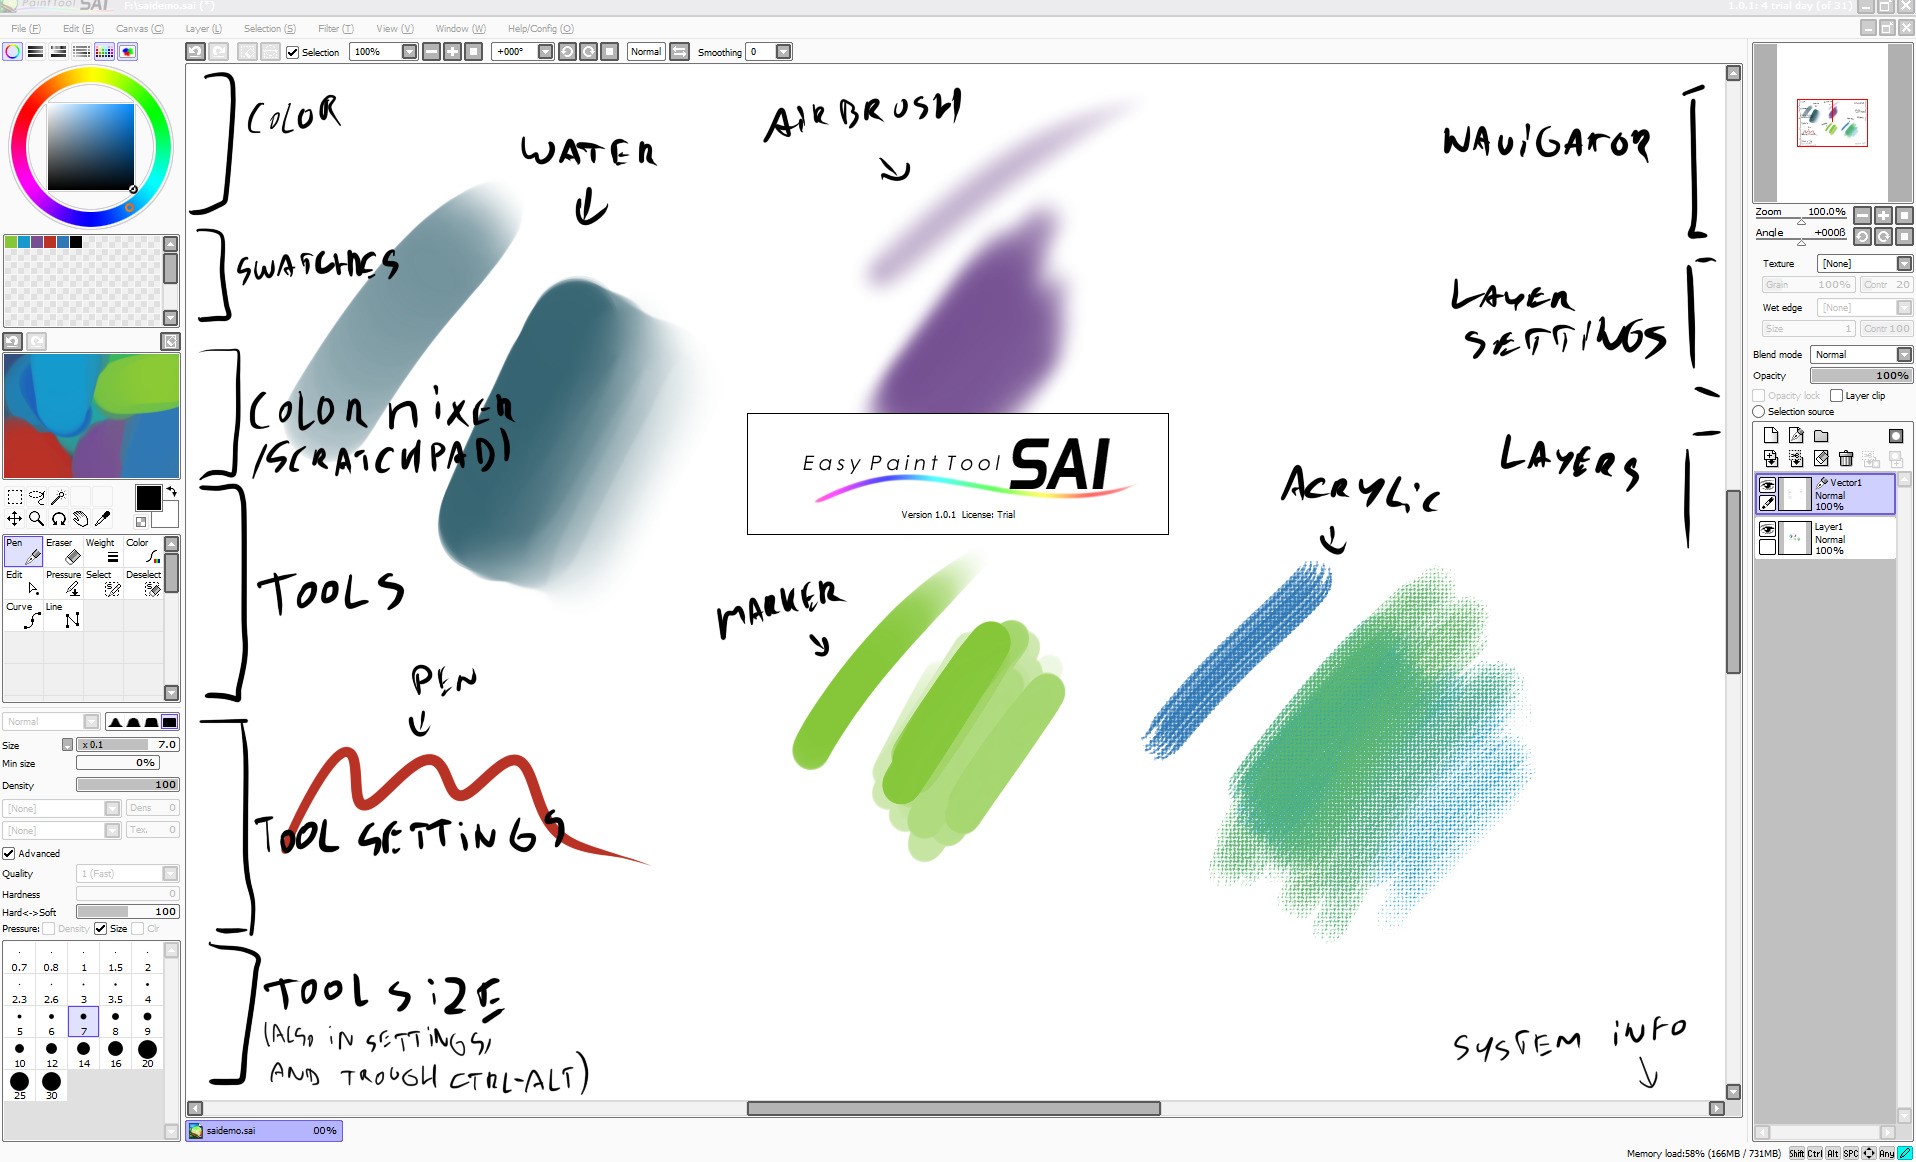 Paint tool sai for mac os x 10.6.8free download for mac os x 10 6 8